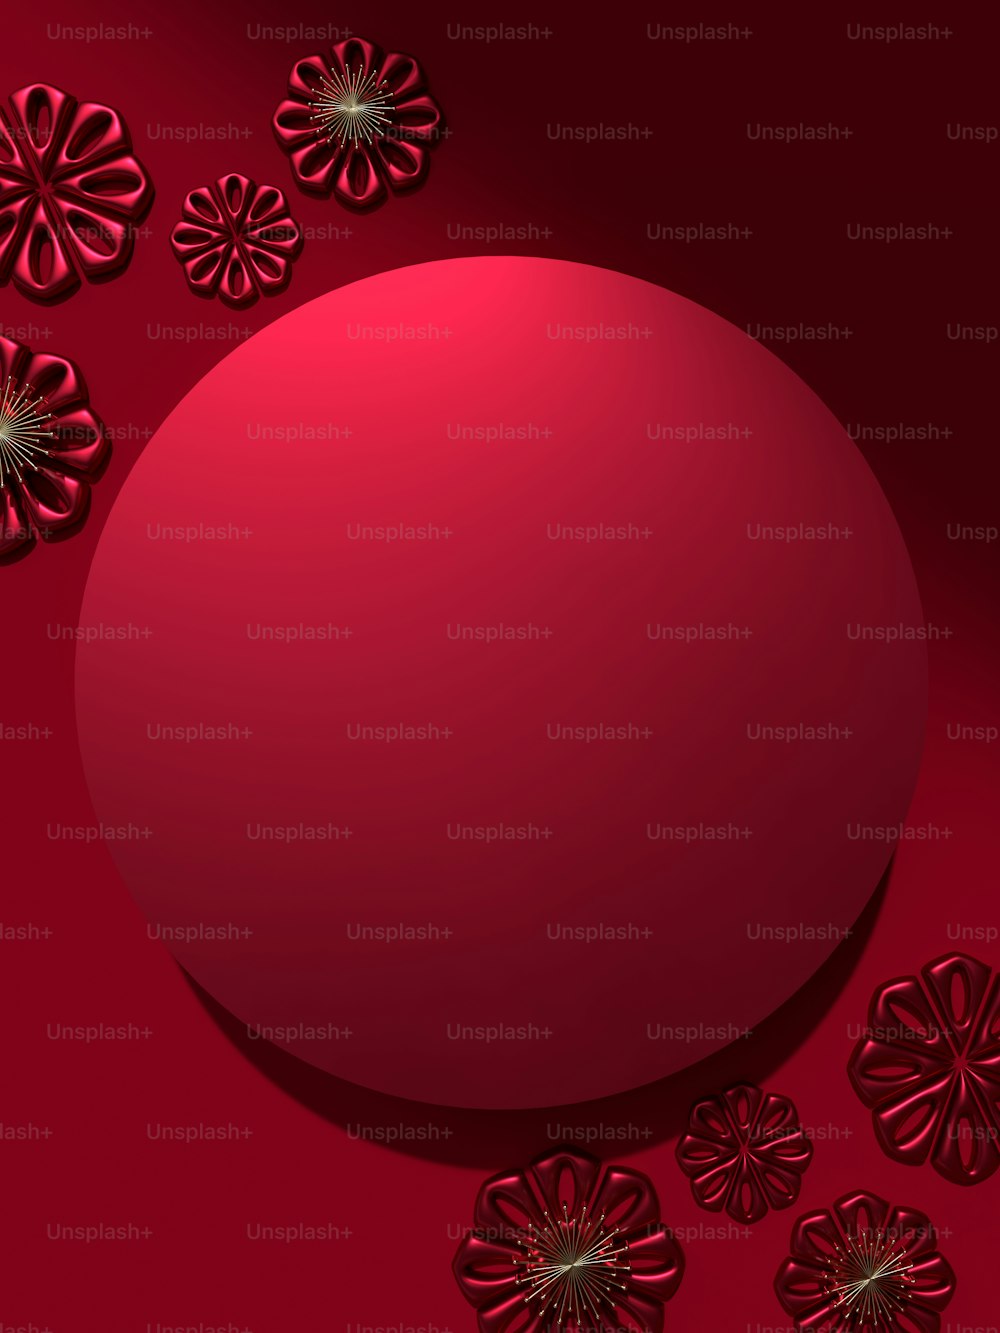 a red background with flowers and a round object